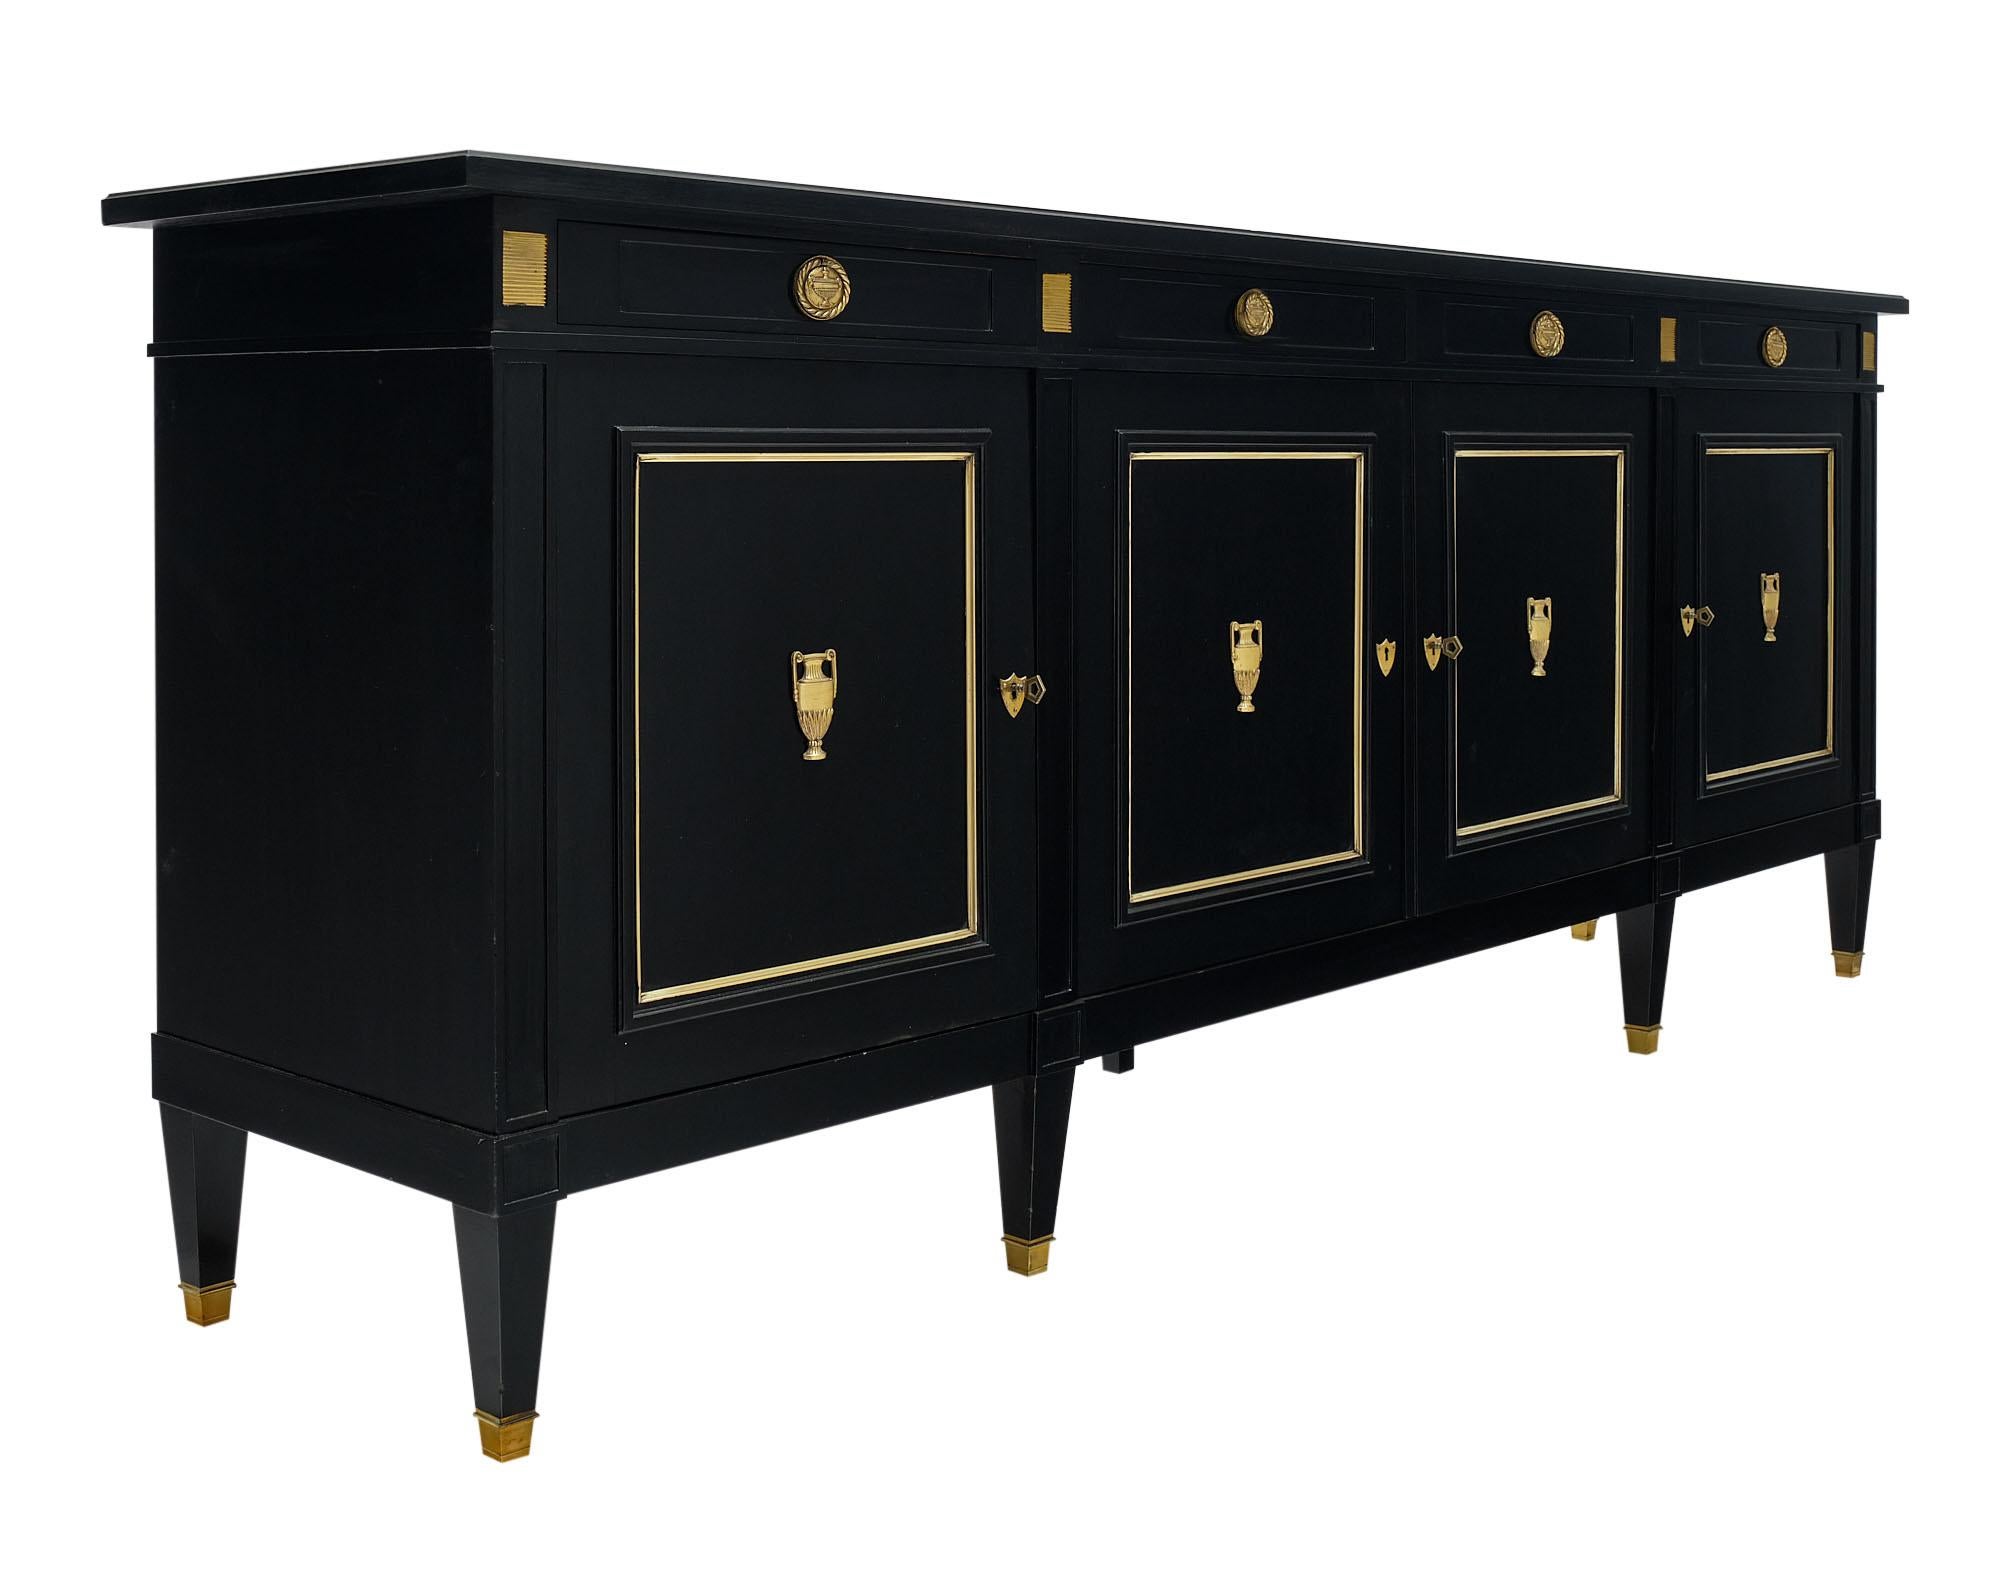 Buffet / enfilade from France made of solid mahogany that has been ebonized and finished with a high luster French polish. There are gilt brass trims throughout and finely cast brass urns “à l’Antique” on all four doors with working locks and keys.